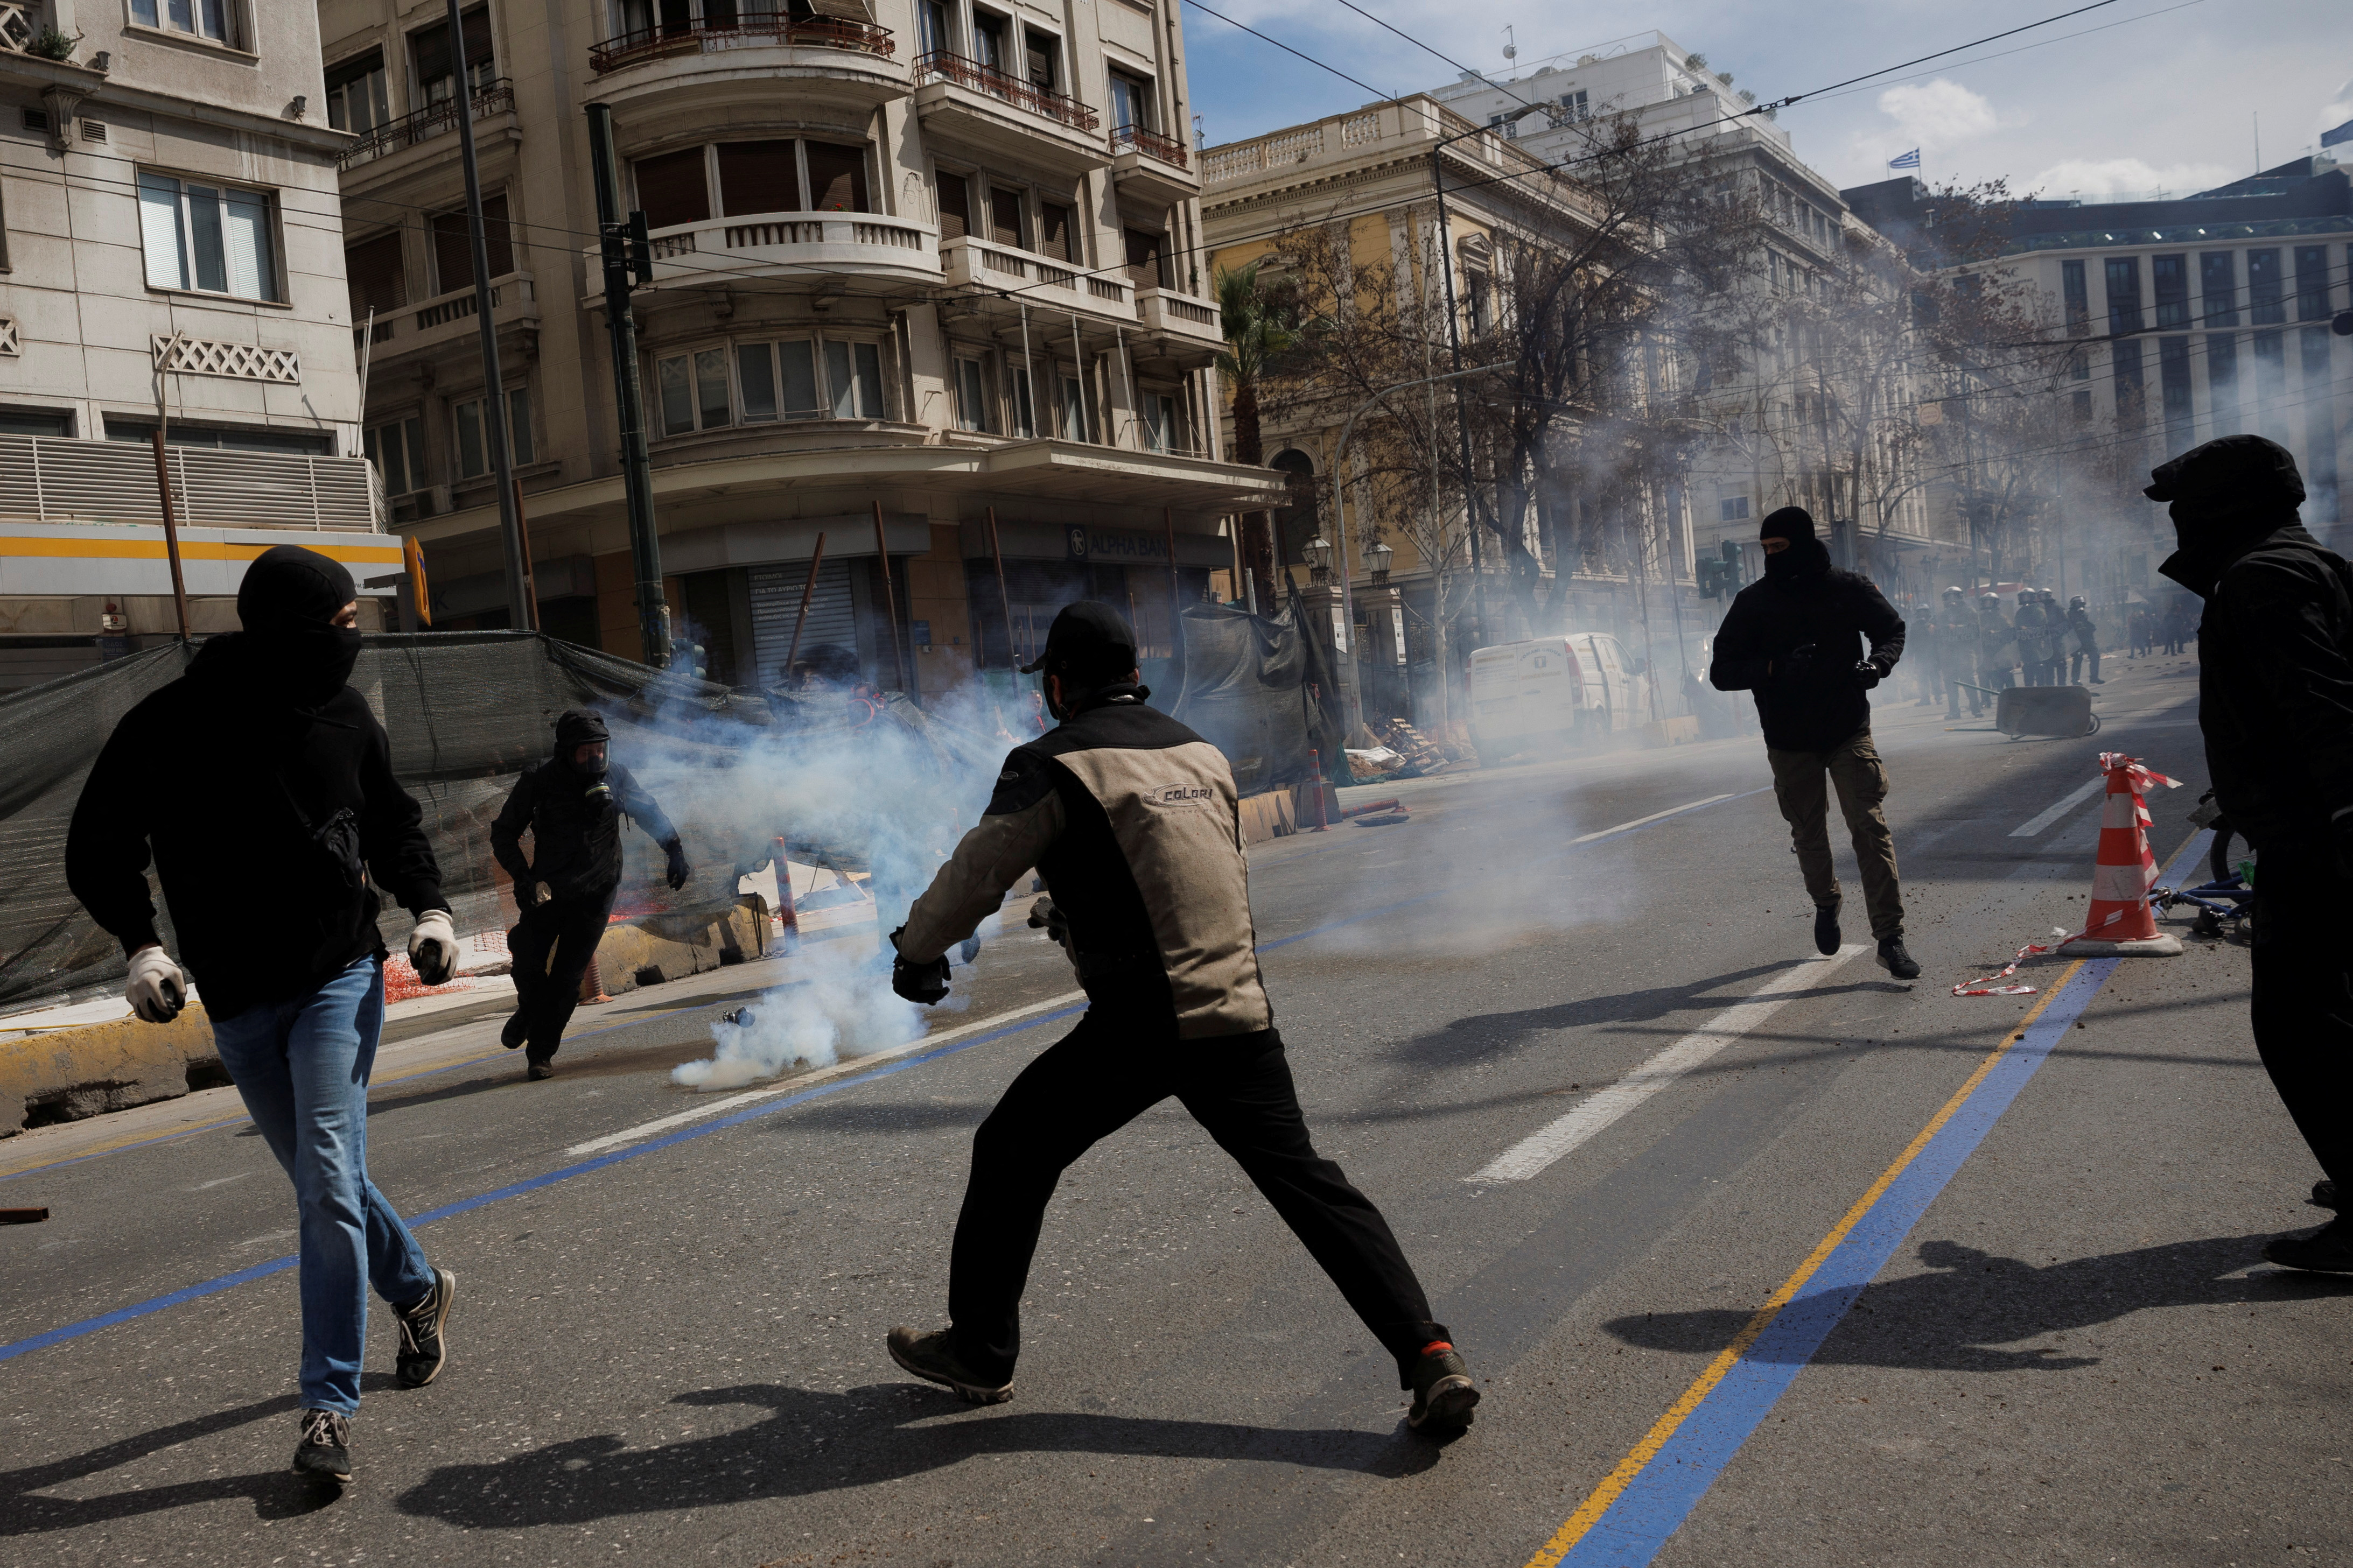 Protesters clash with police during a demonstration after a train crash near the city of Larissa, in Athens